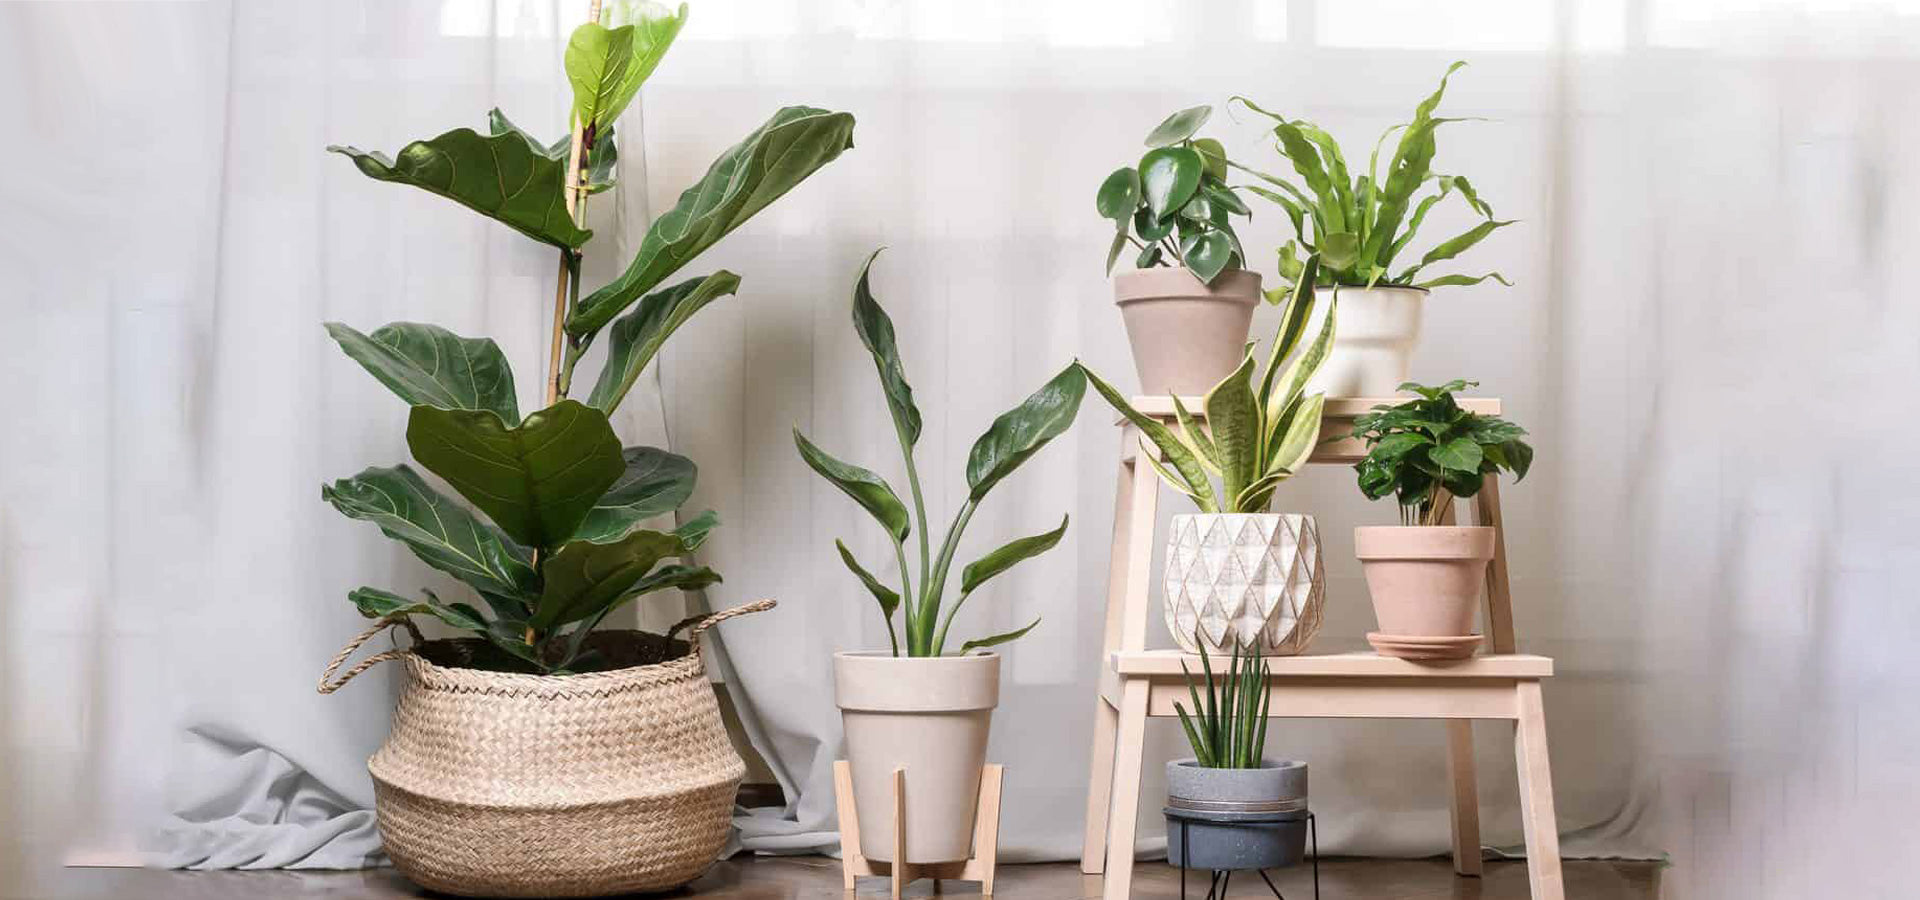 Full Spectrum Light for Indoor Plants：Daylight White increase light intensity and enhance photosynthesis,it is similar to the natural sunlight and ideal for all sorts of indoor plants at all growth stage.